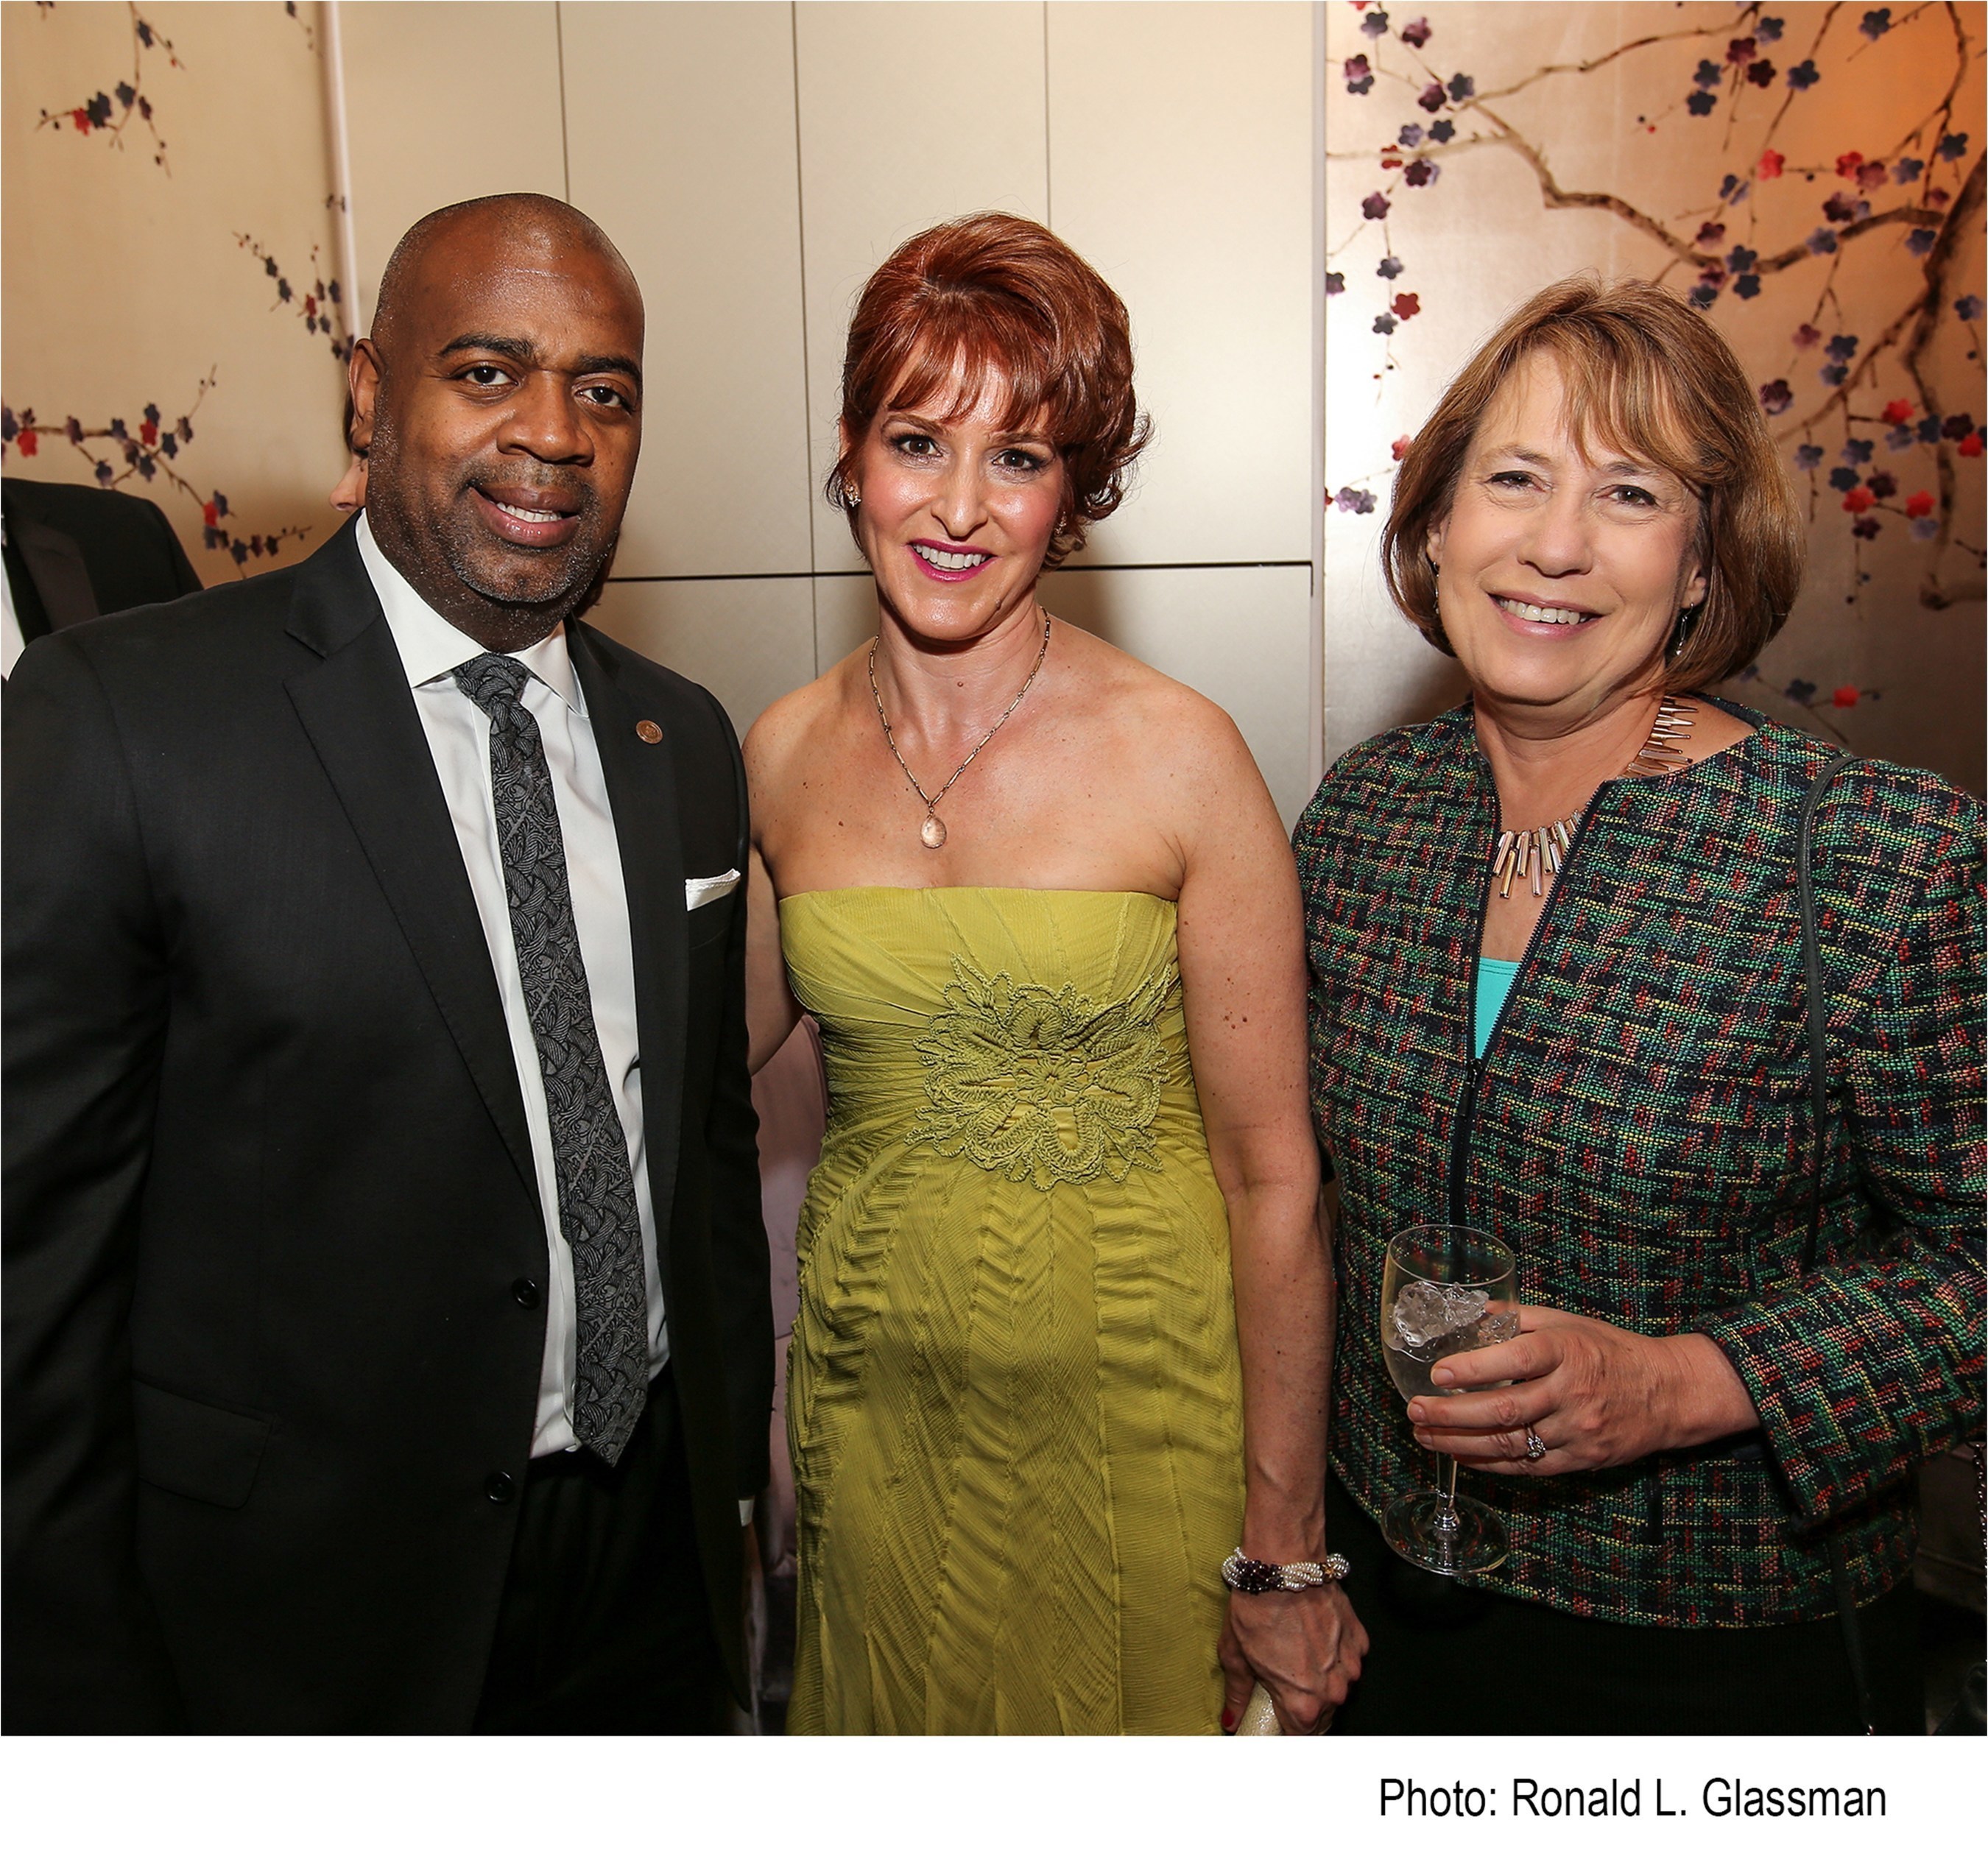 From left to right: Ras Baraka, Mayor, City of Newark, Gabrielle L. Kurlander, President and CEO, All Stars Project, Inc. and Sheila C. Bair,  President, Washington College at the All Stars Project 2016 National Gala at Lincoln Center in New York City on April 18, 2016.  The event raised over $2M in private funding for All Stars' afterschool development programs for inner-city youth across the country.